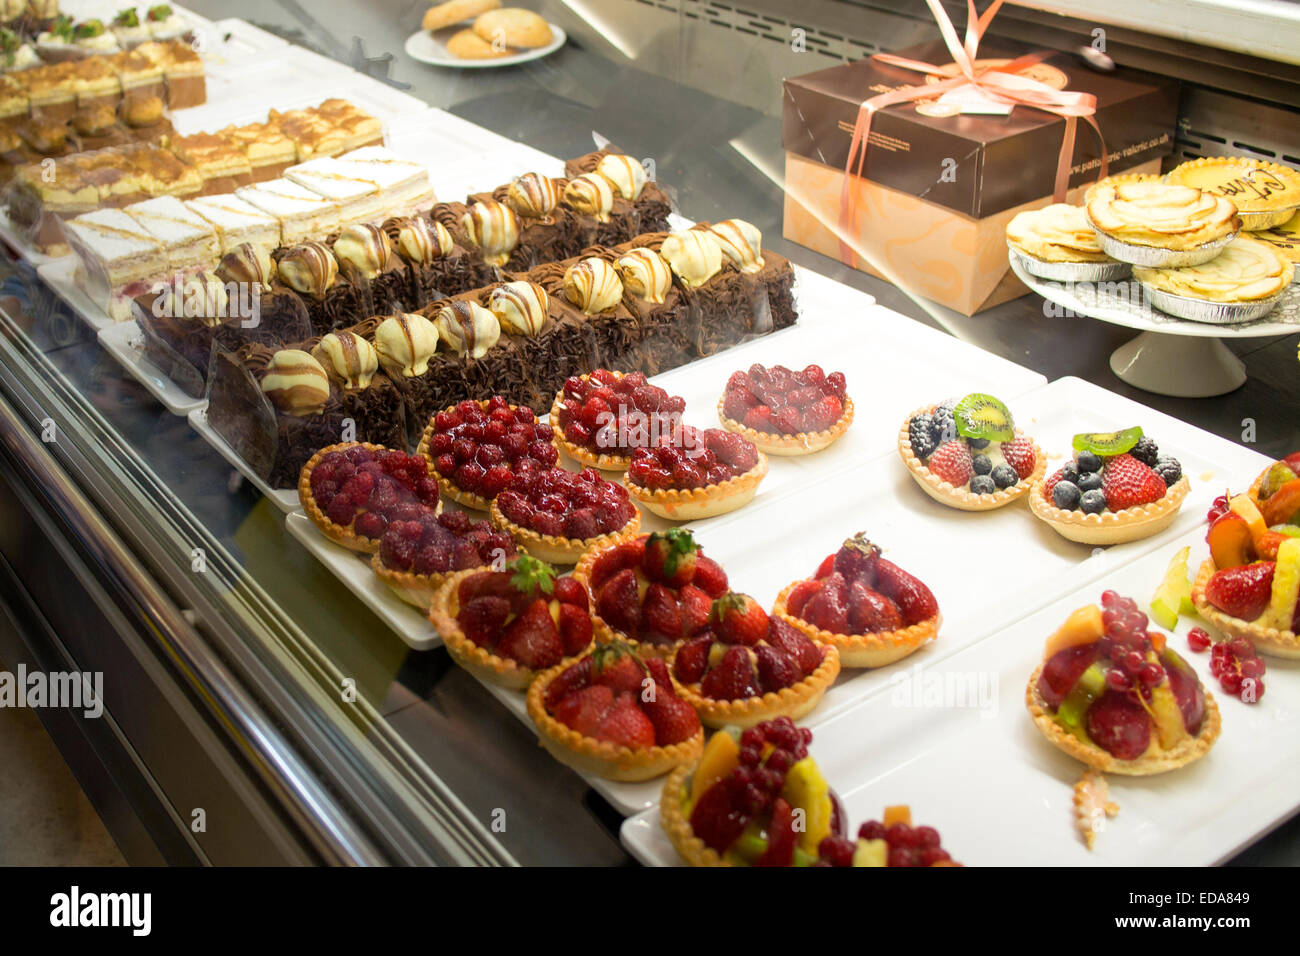 A selection of valerie patisserie individual portions slices cakes in a shop counter Stock Photo